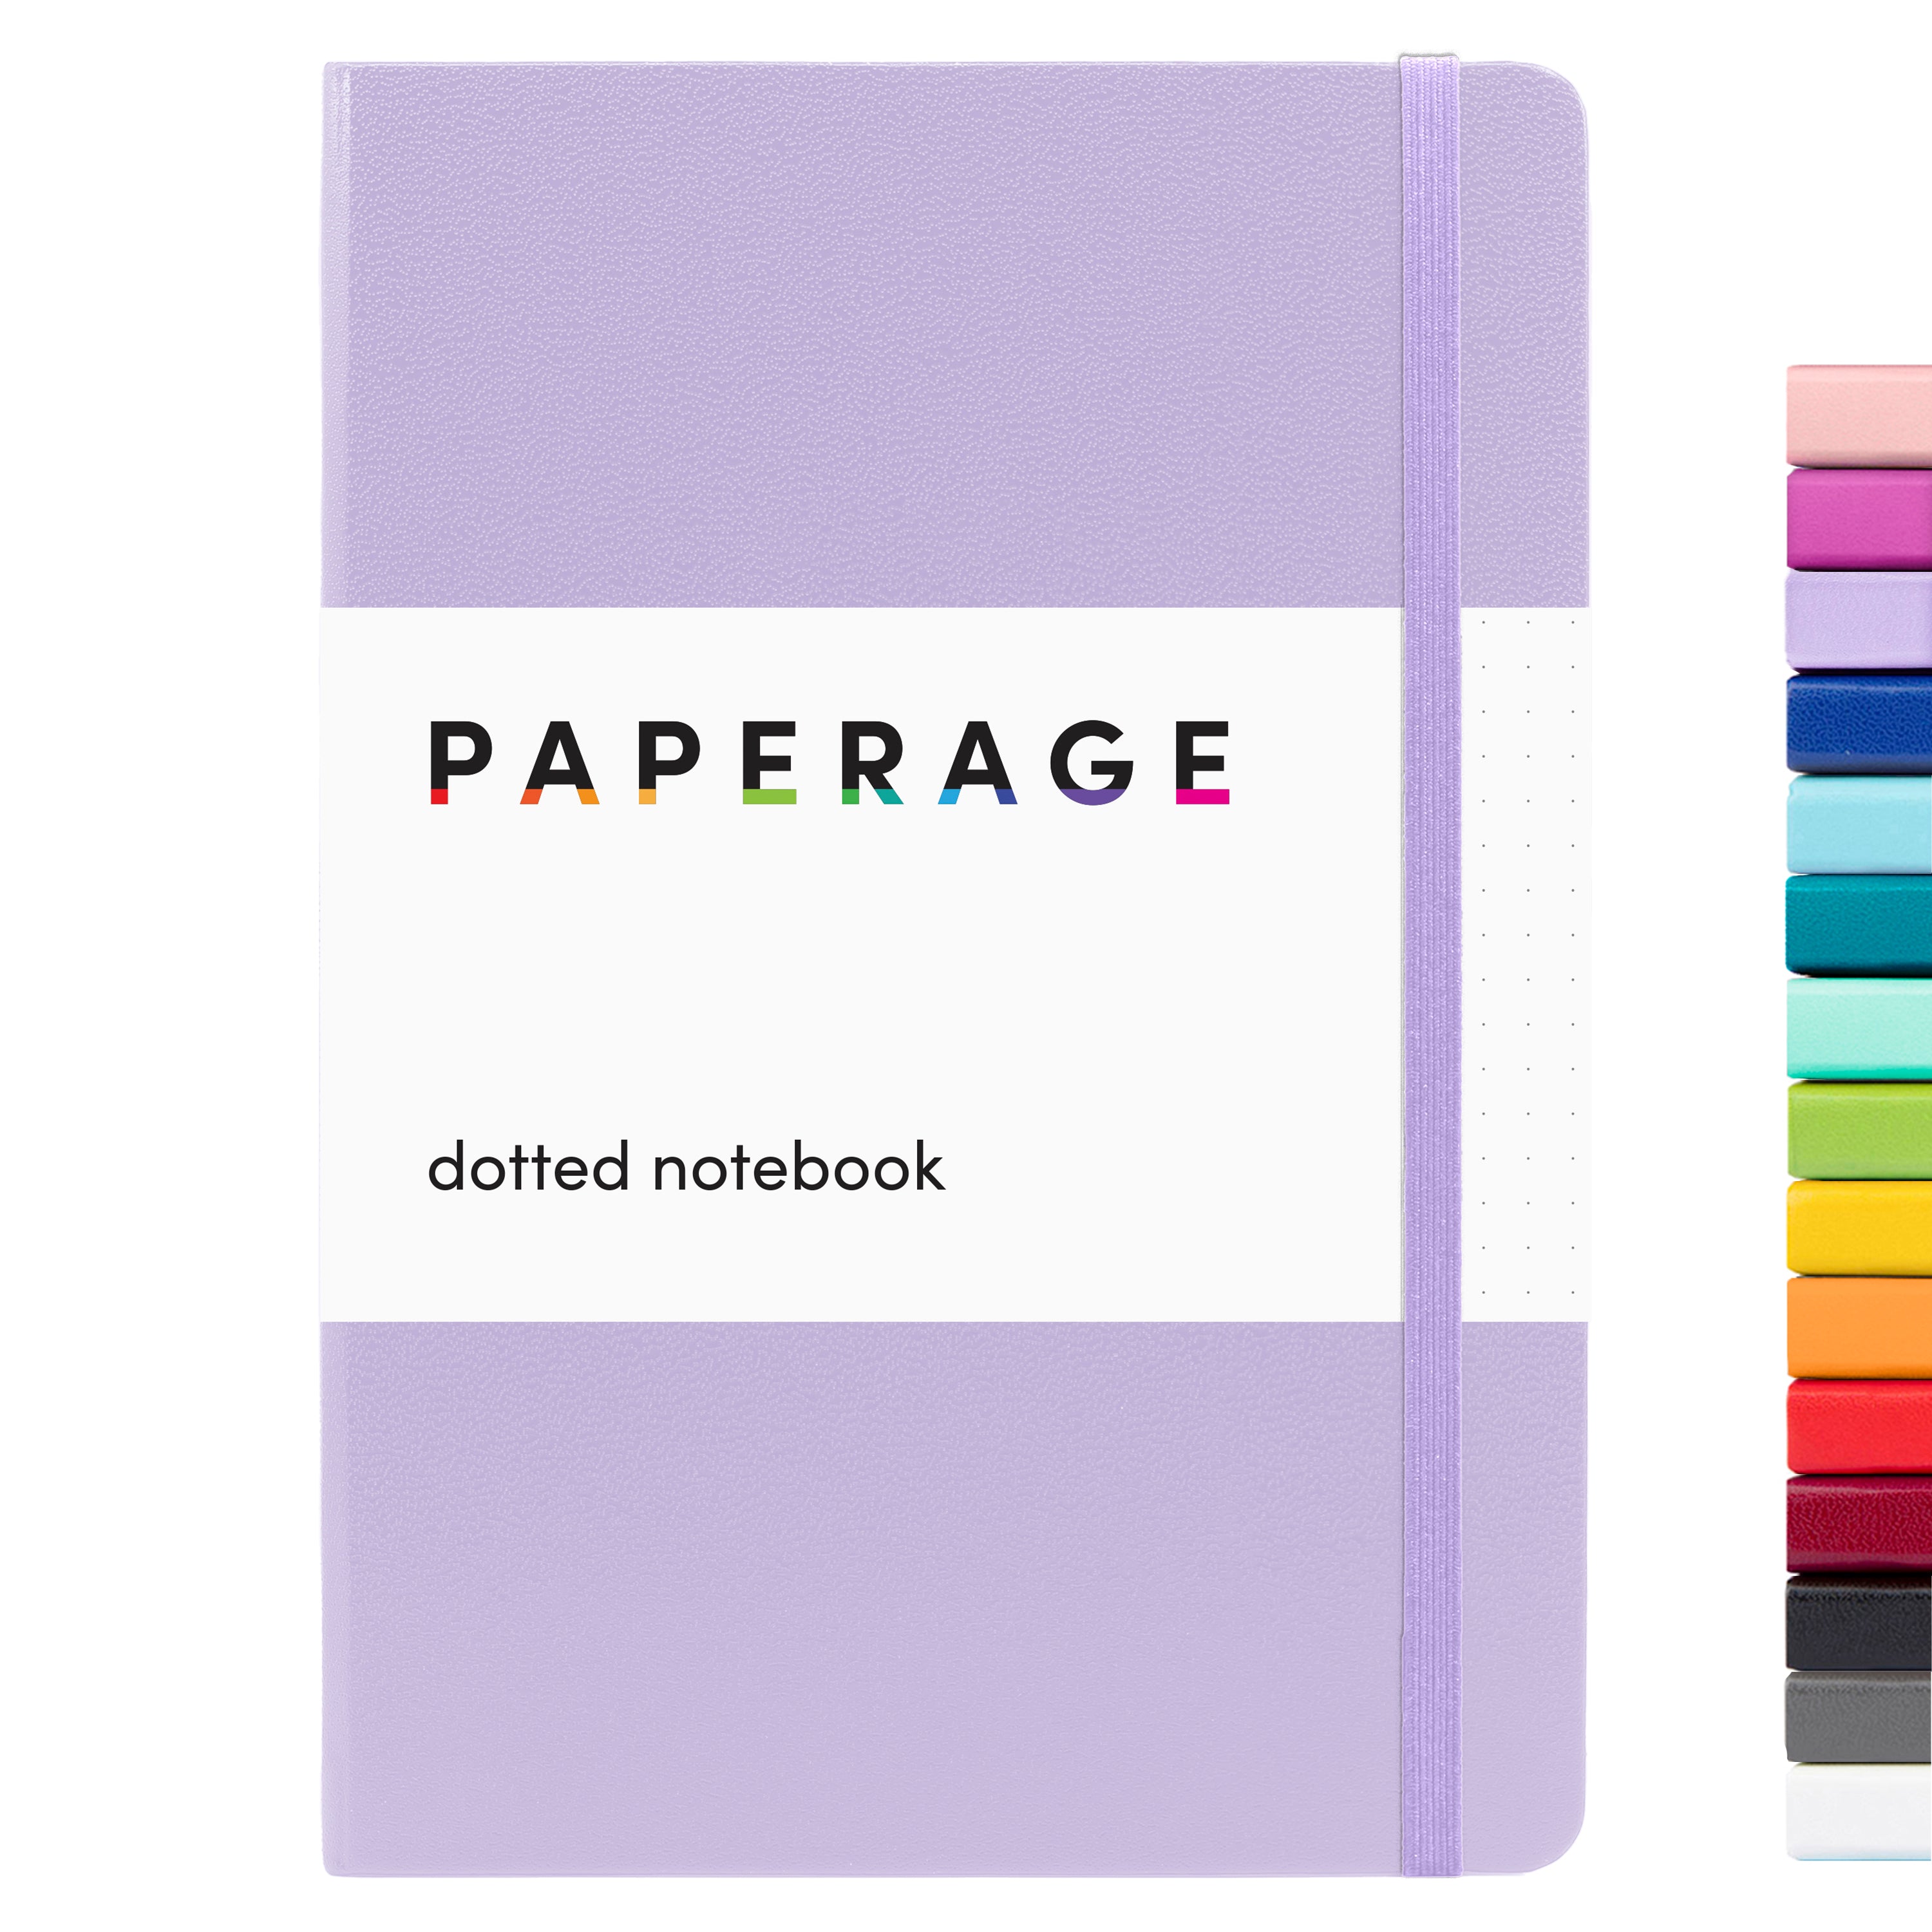 Blank Page Journal Notebook, Hardcover (5.7 in x 8 in)